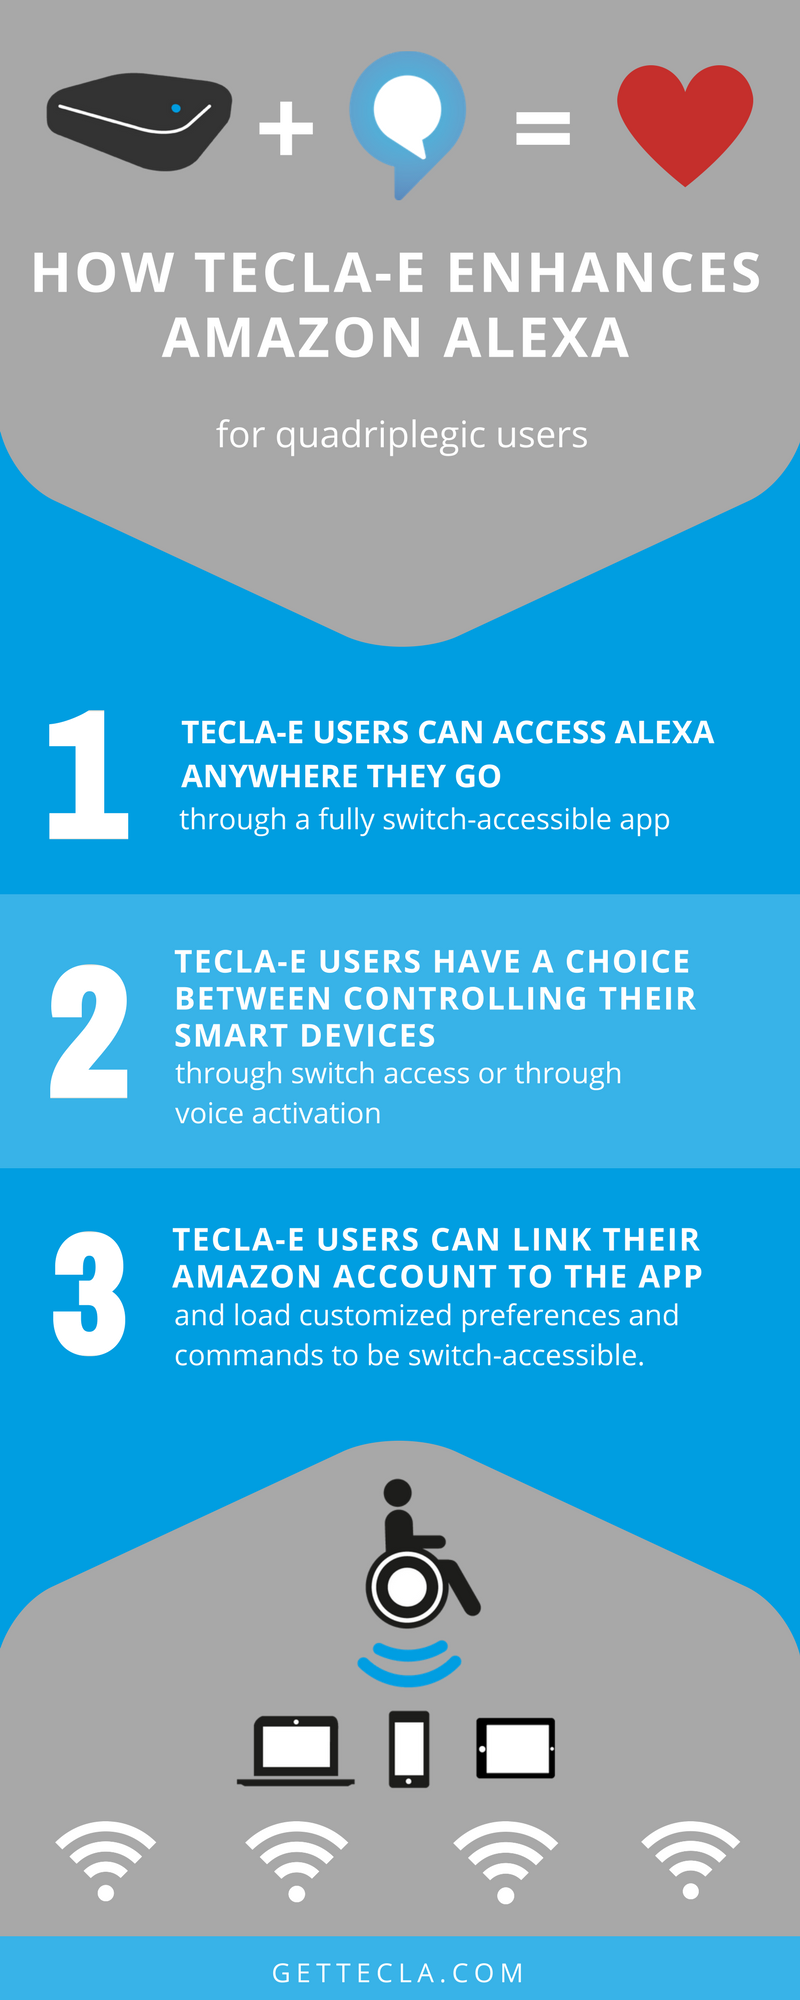 Graphic: how tecla-e enhances Amazon Alexa for quadriplegic users. 1 TECLA-E USERS CAN ACCESS ALEXA ANYWHERE THEY GO THROUGH A FULLY SWITCH-ACCESSIBLE APP, 2 TECLA-E USERS CAN HAVE A CHOICE BETWEEN CONTROLLING THEIR SMART DEVICES THROUGH SWITCH ACCESS OR THROUGH VOICE ACTIVATION, 3 TECLA-E USERS CAN LINK THEIR AMAZON ACCOUNT TO THE APP AND LOAD CUSTOMIZED PREFERENCES AND COMMANDS TO BE SWITCH-ACCESSIBLE.